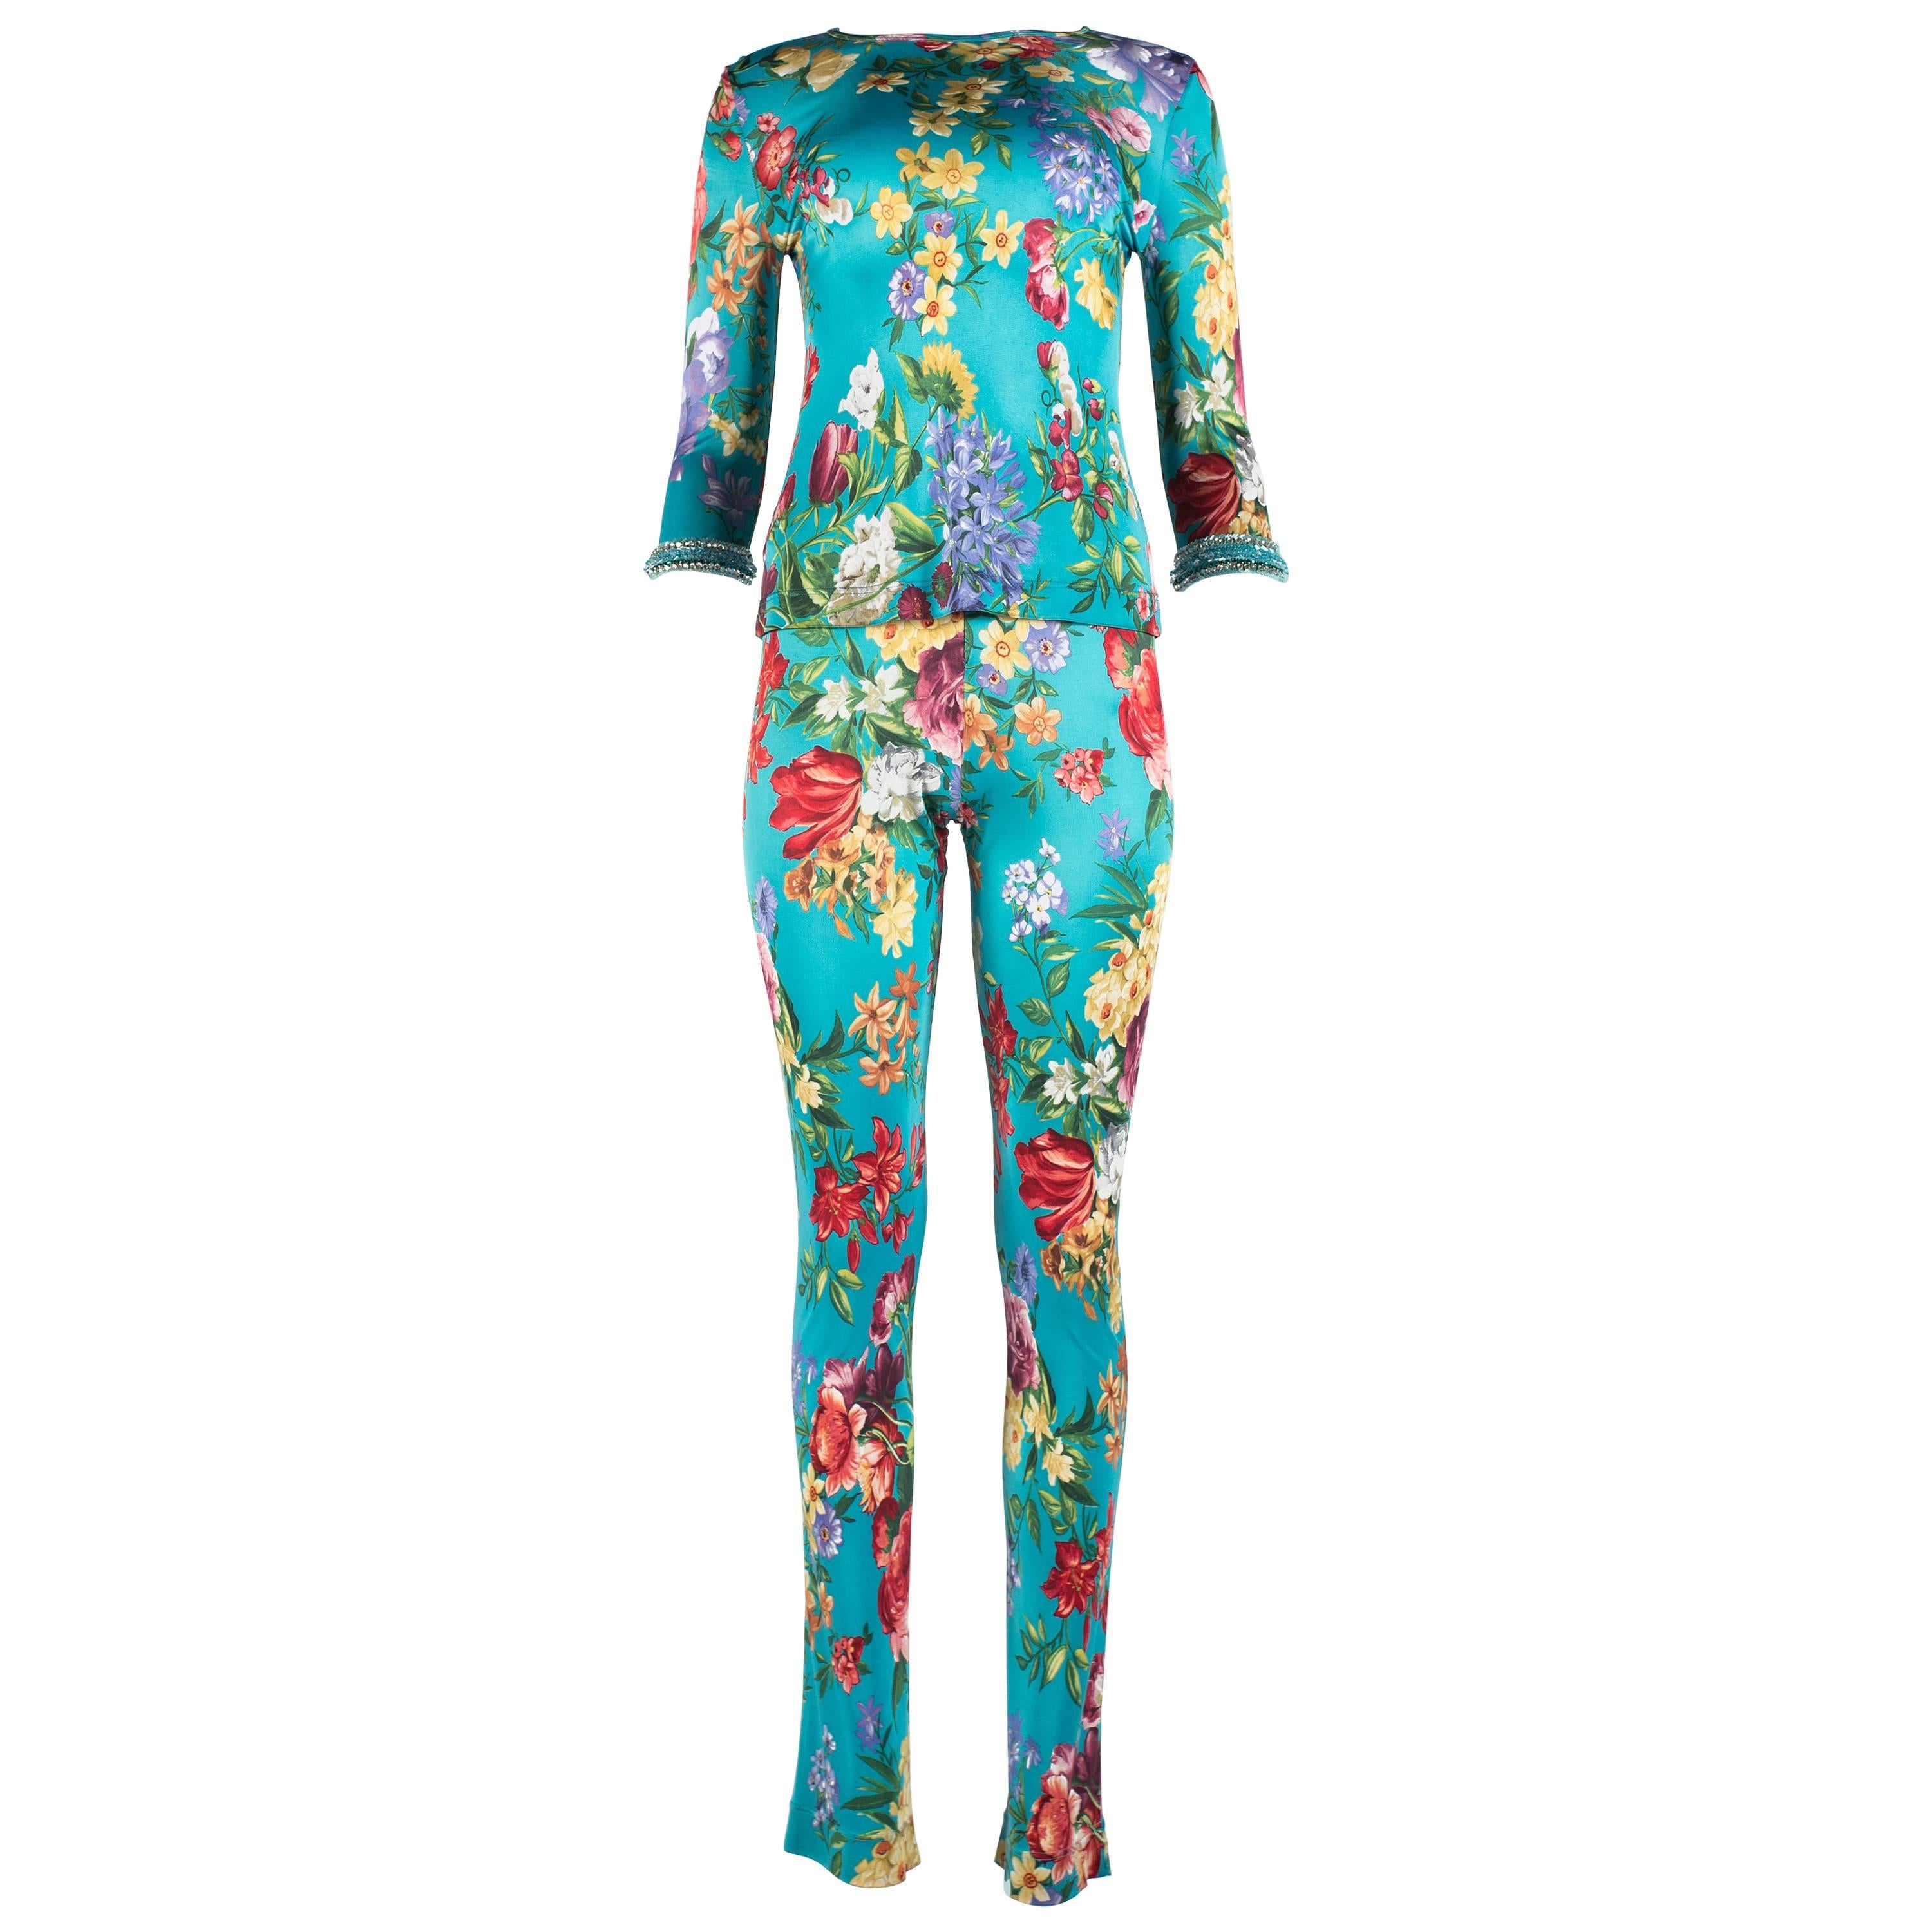 Dolce & Gabbana viscose jersey turquoise floral pant suit, circa 1999 For Sale